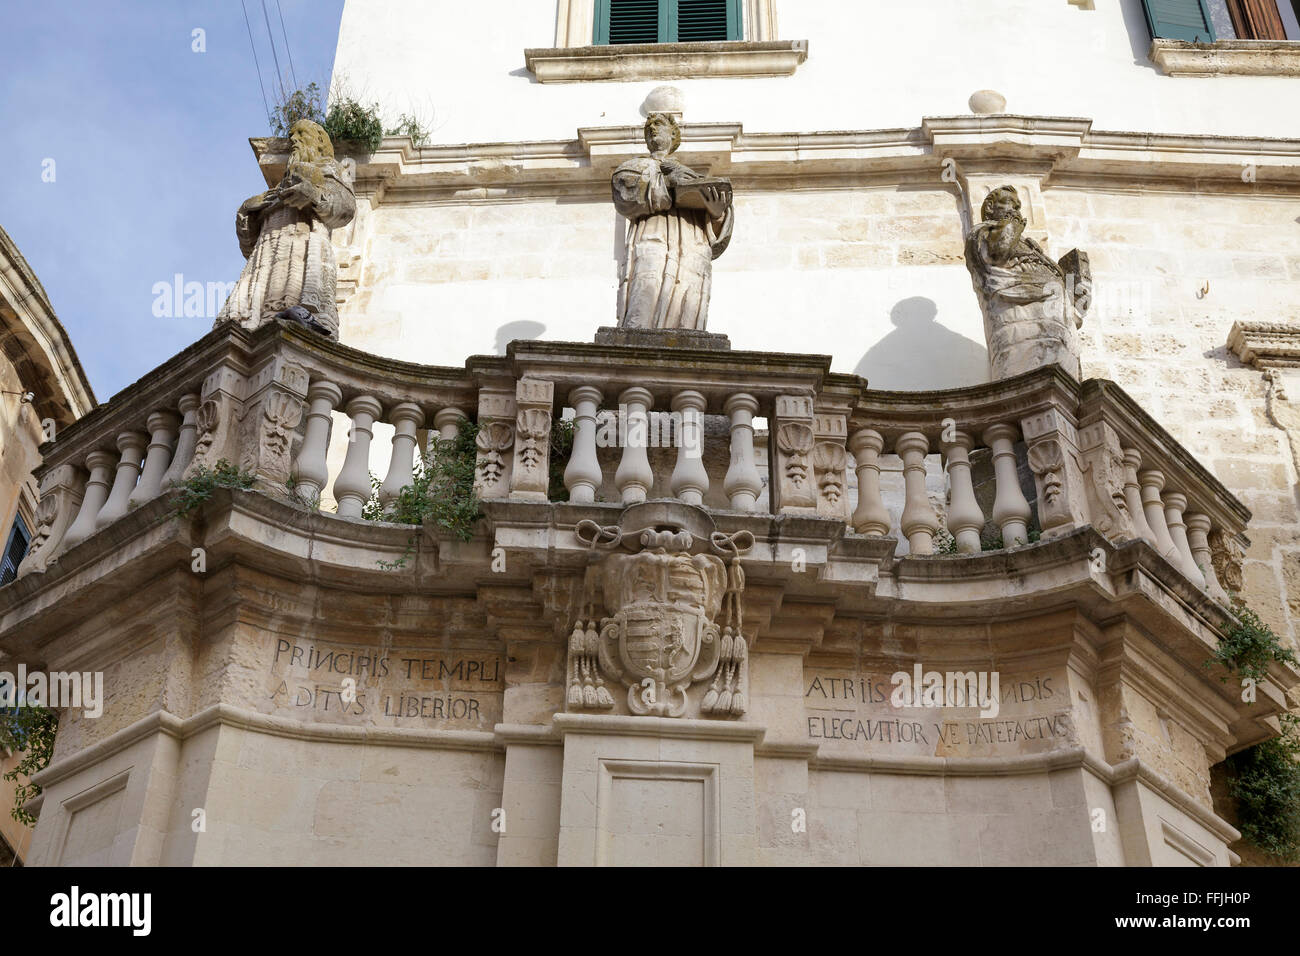 statues on balustrade at the entrance to Piazza del Duomo, Lecce ...